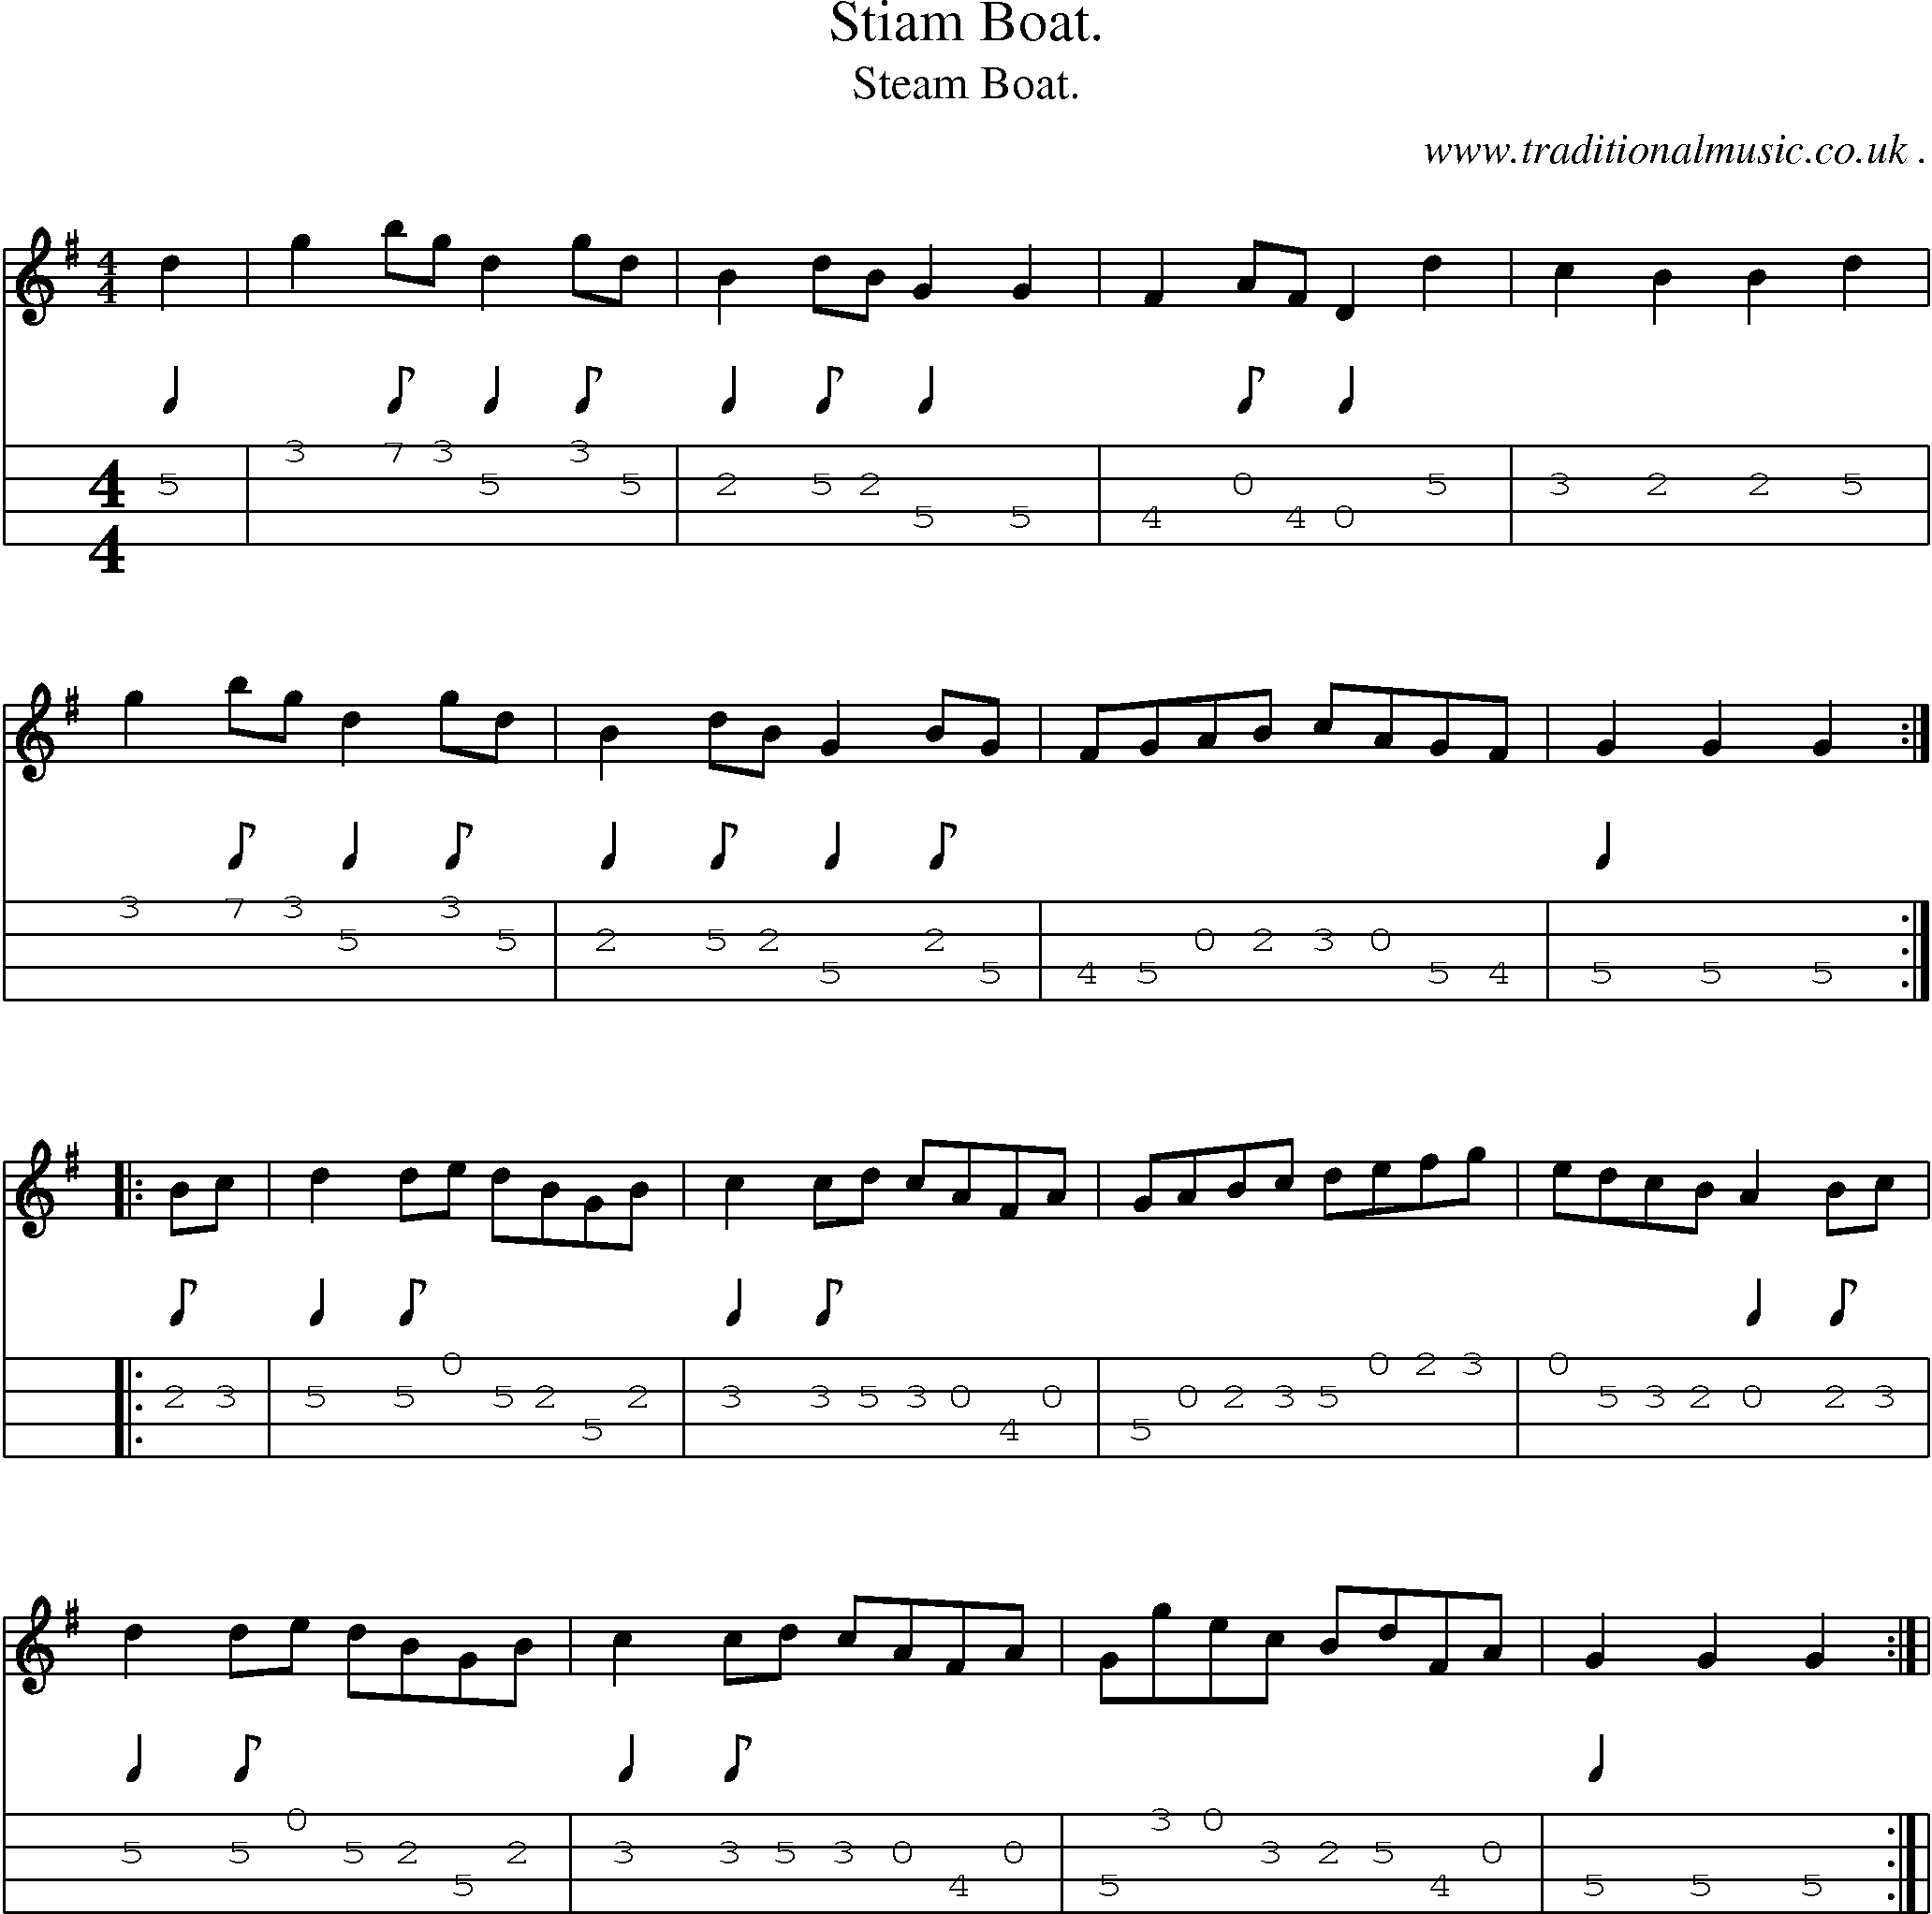 Sheet-Music and Mandolin Tabs for Stiam Boat